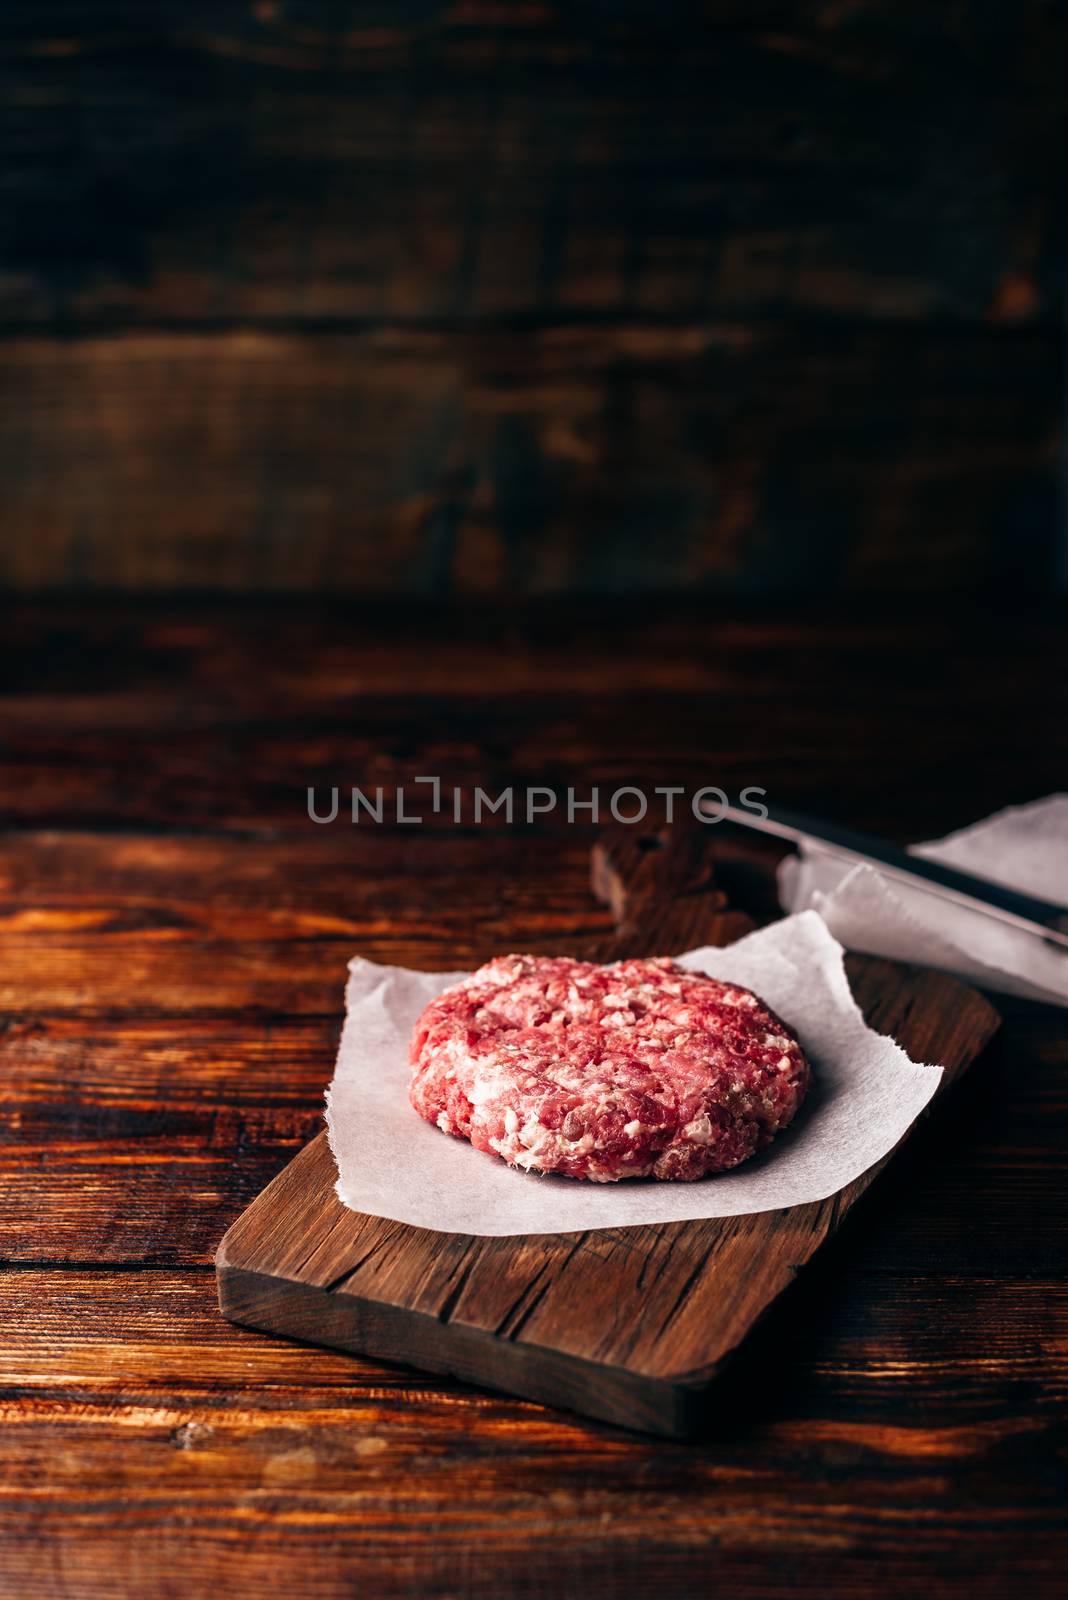 Raw Beef Patty for Burger on Cutting Board and Wax Paper. Vertical Orientation and Copy Space.